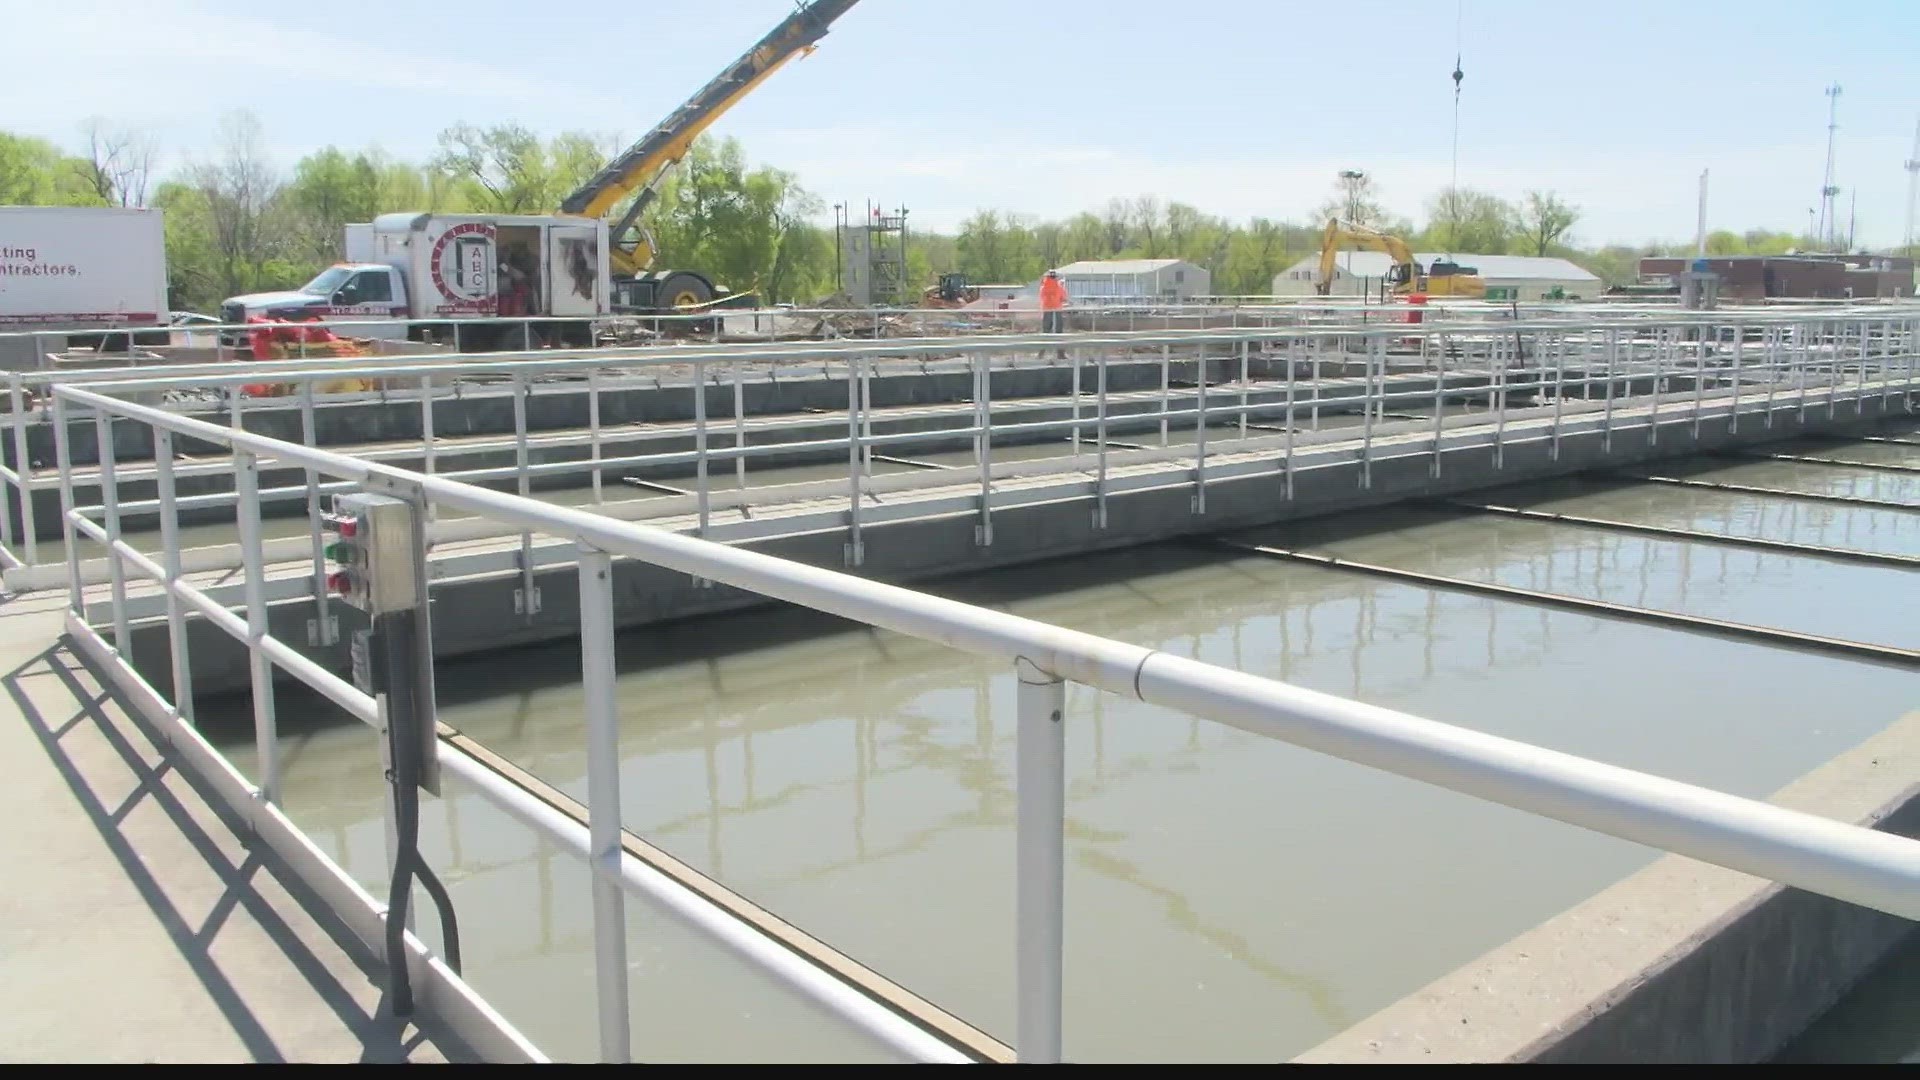 Officials say testing wastewater can provide a strong indicator of coronavirus cases in a community.